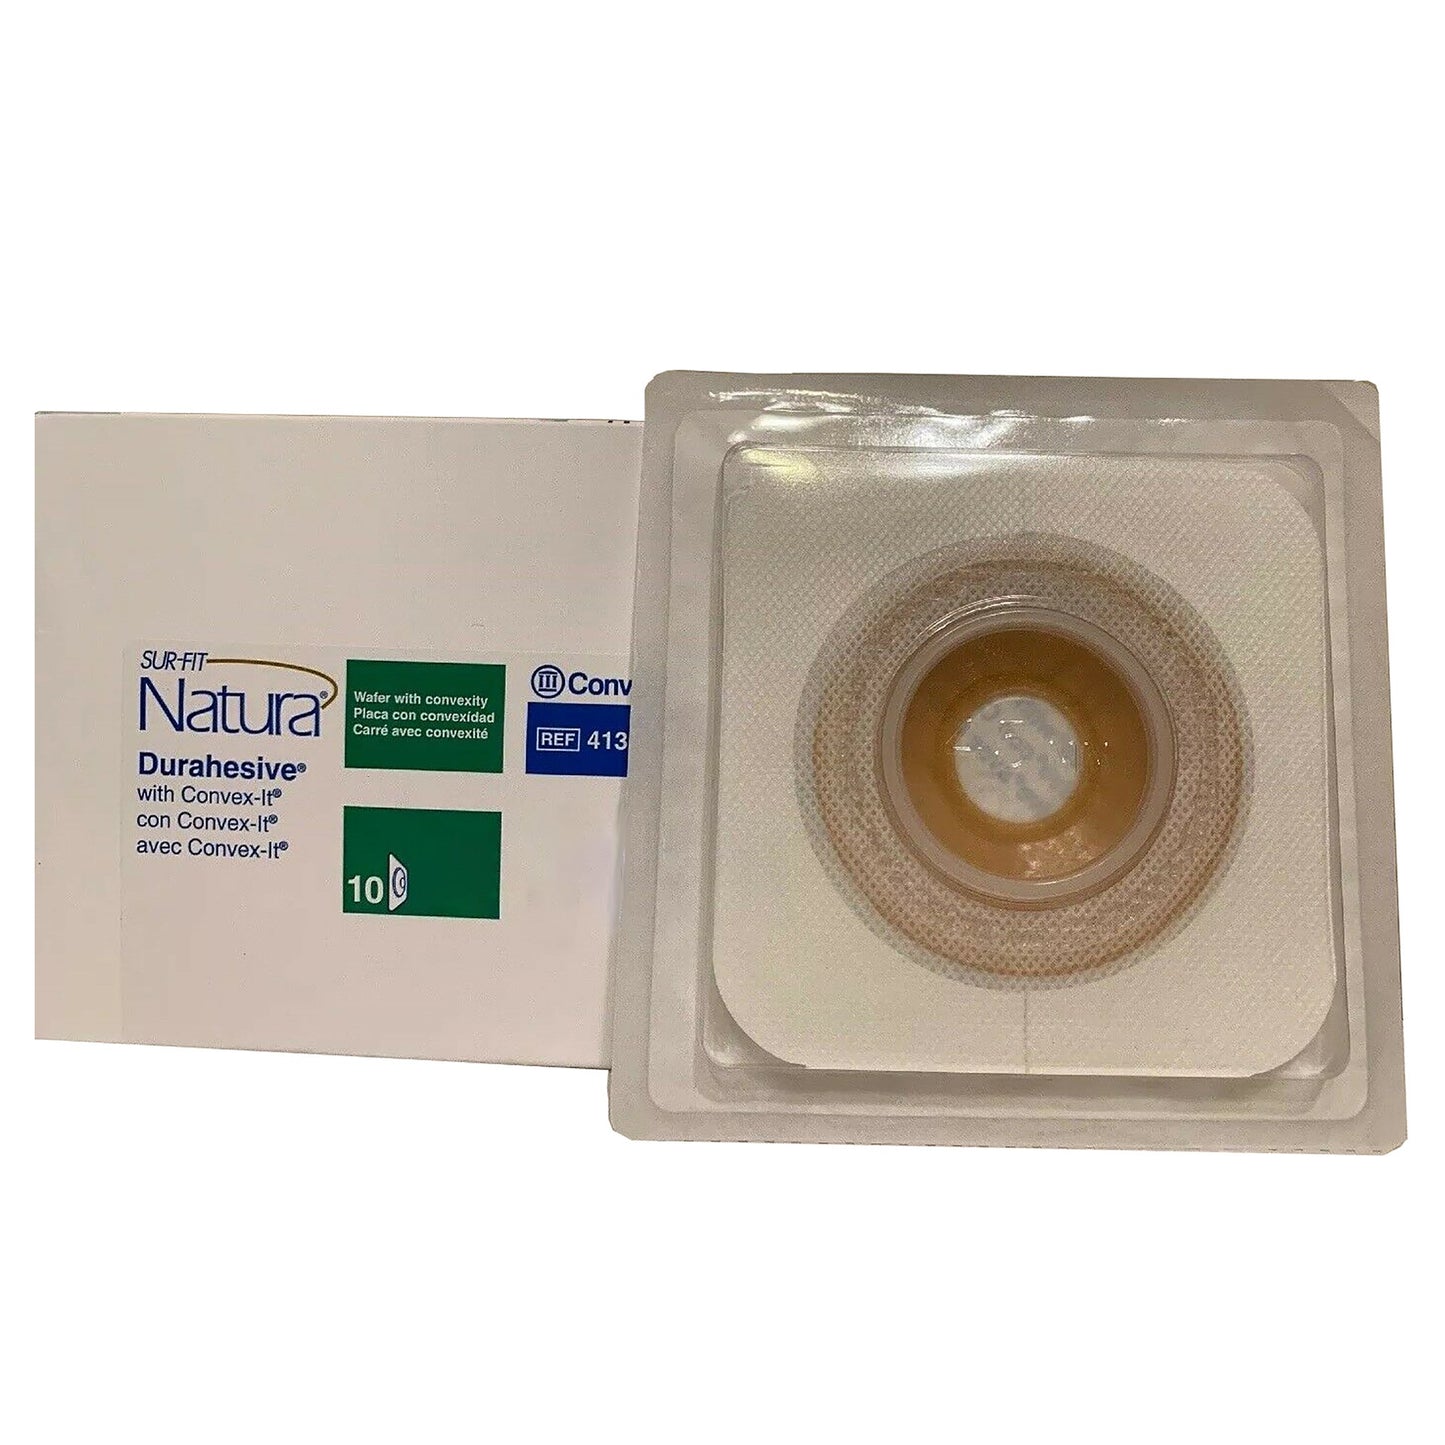 Sur-Fit Natura® Durahesive® Ostomy Barrier With 7/8-1.25 " Stoma Opening